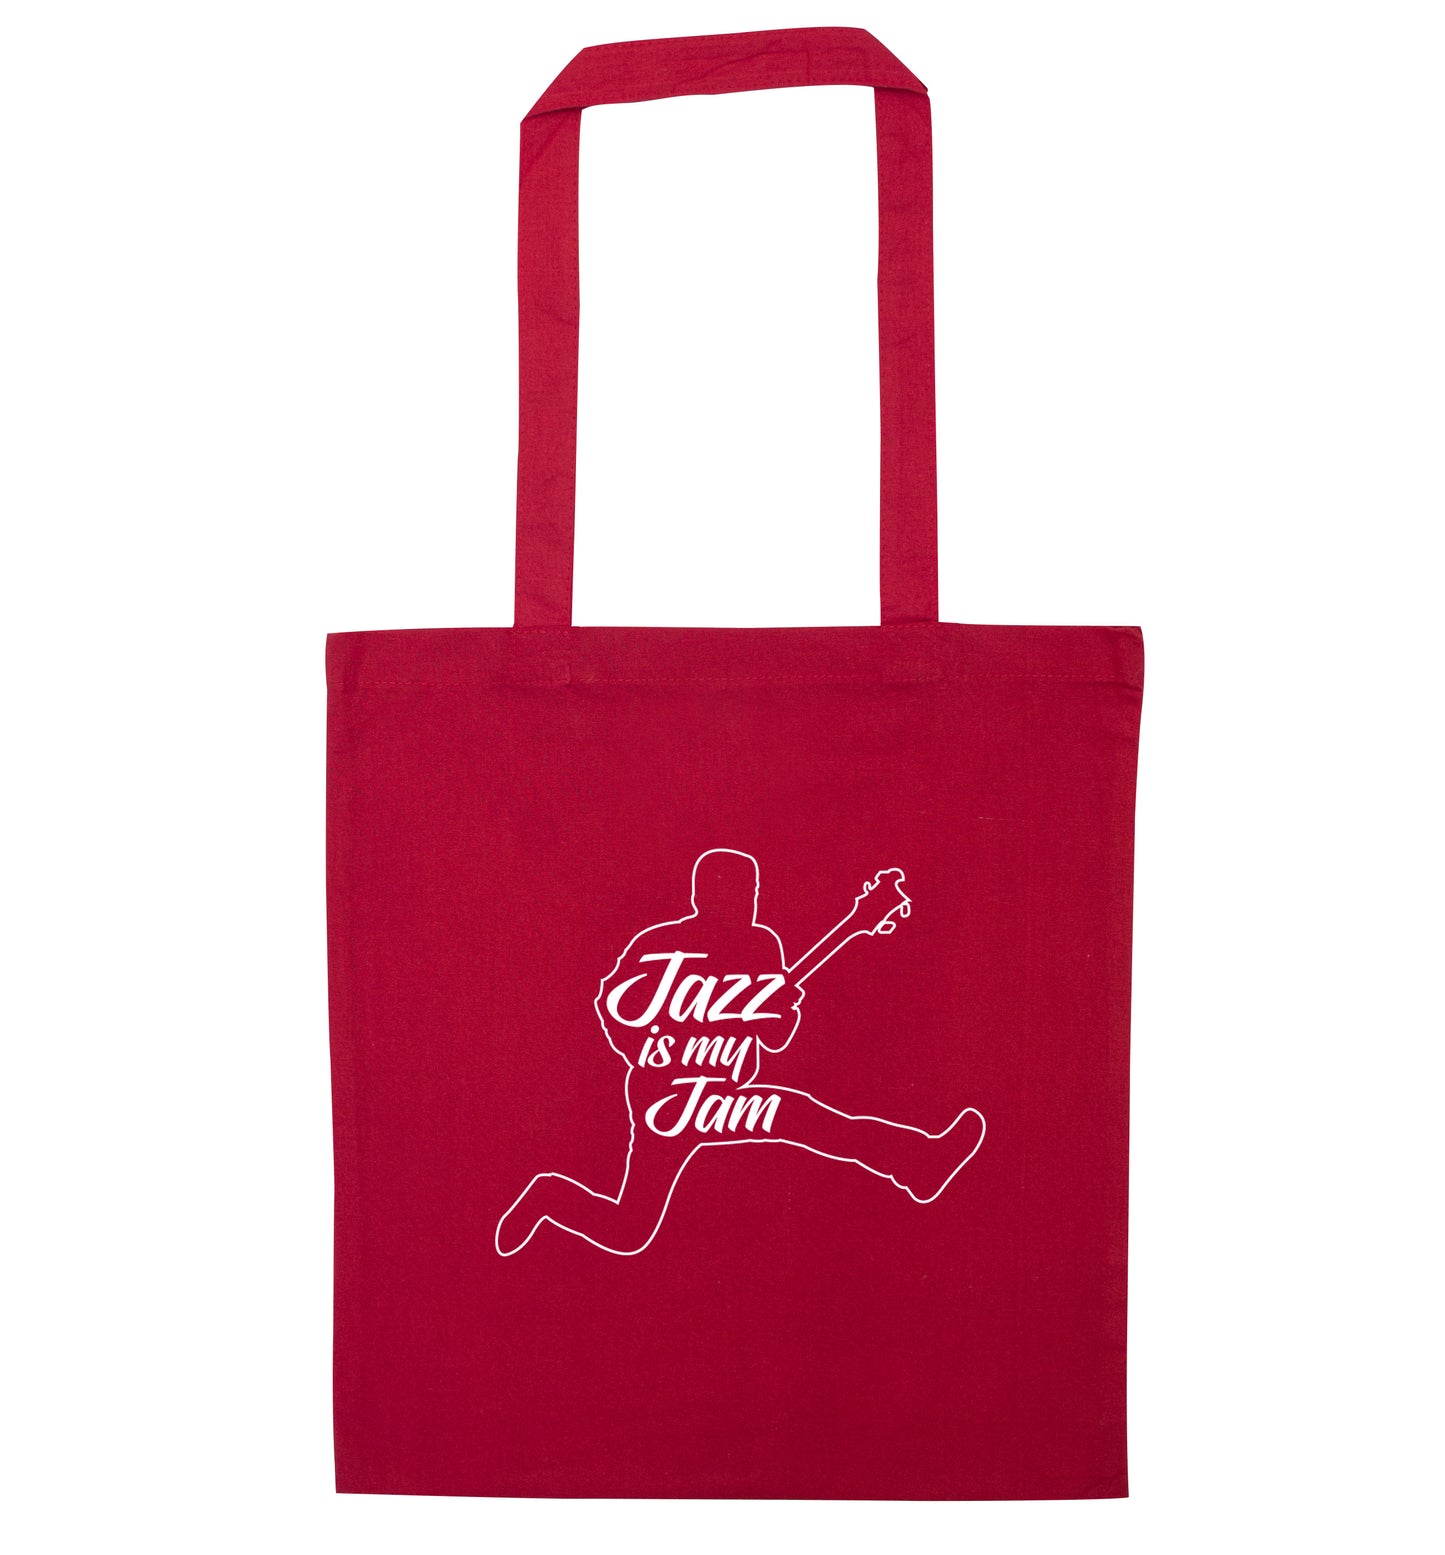 Jazz is my jam red tote bag